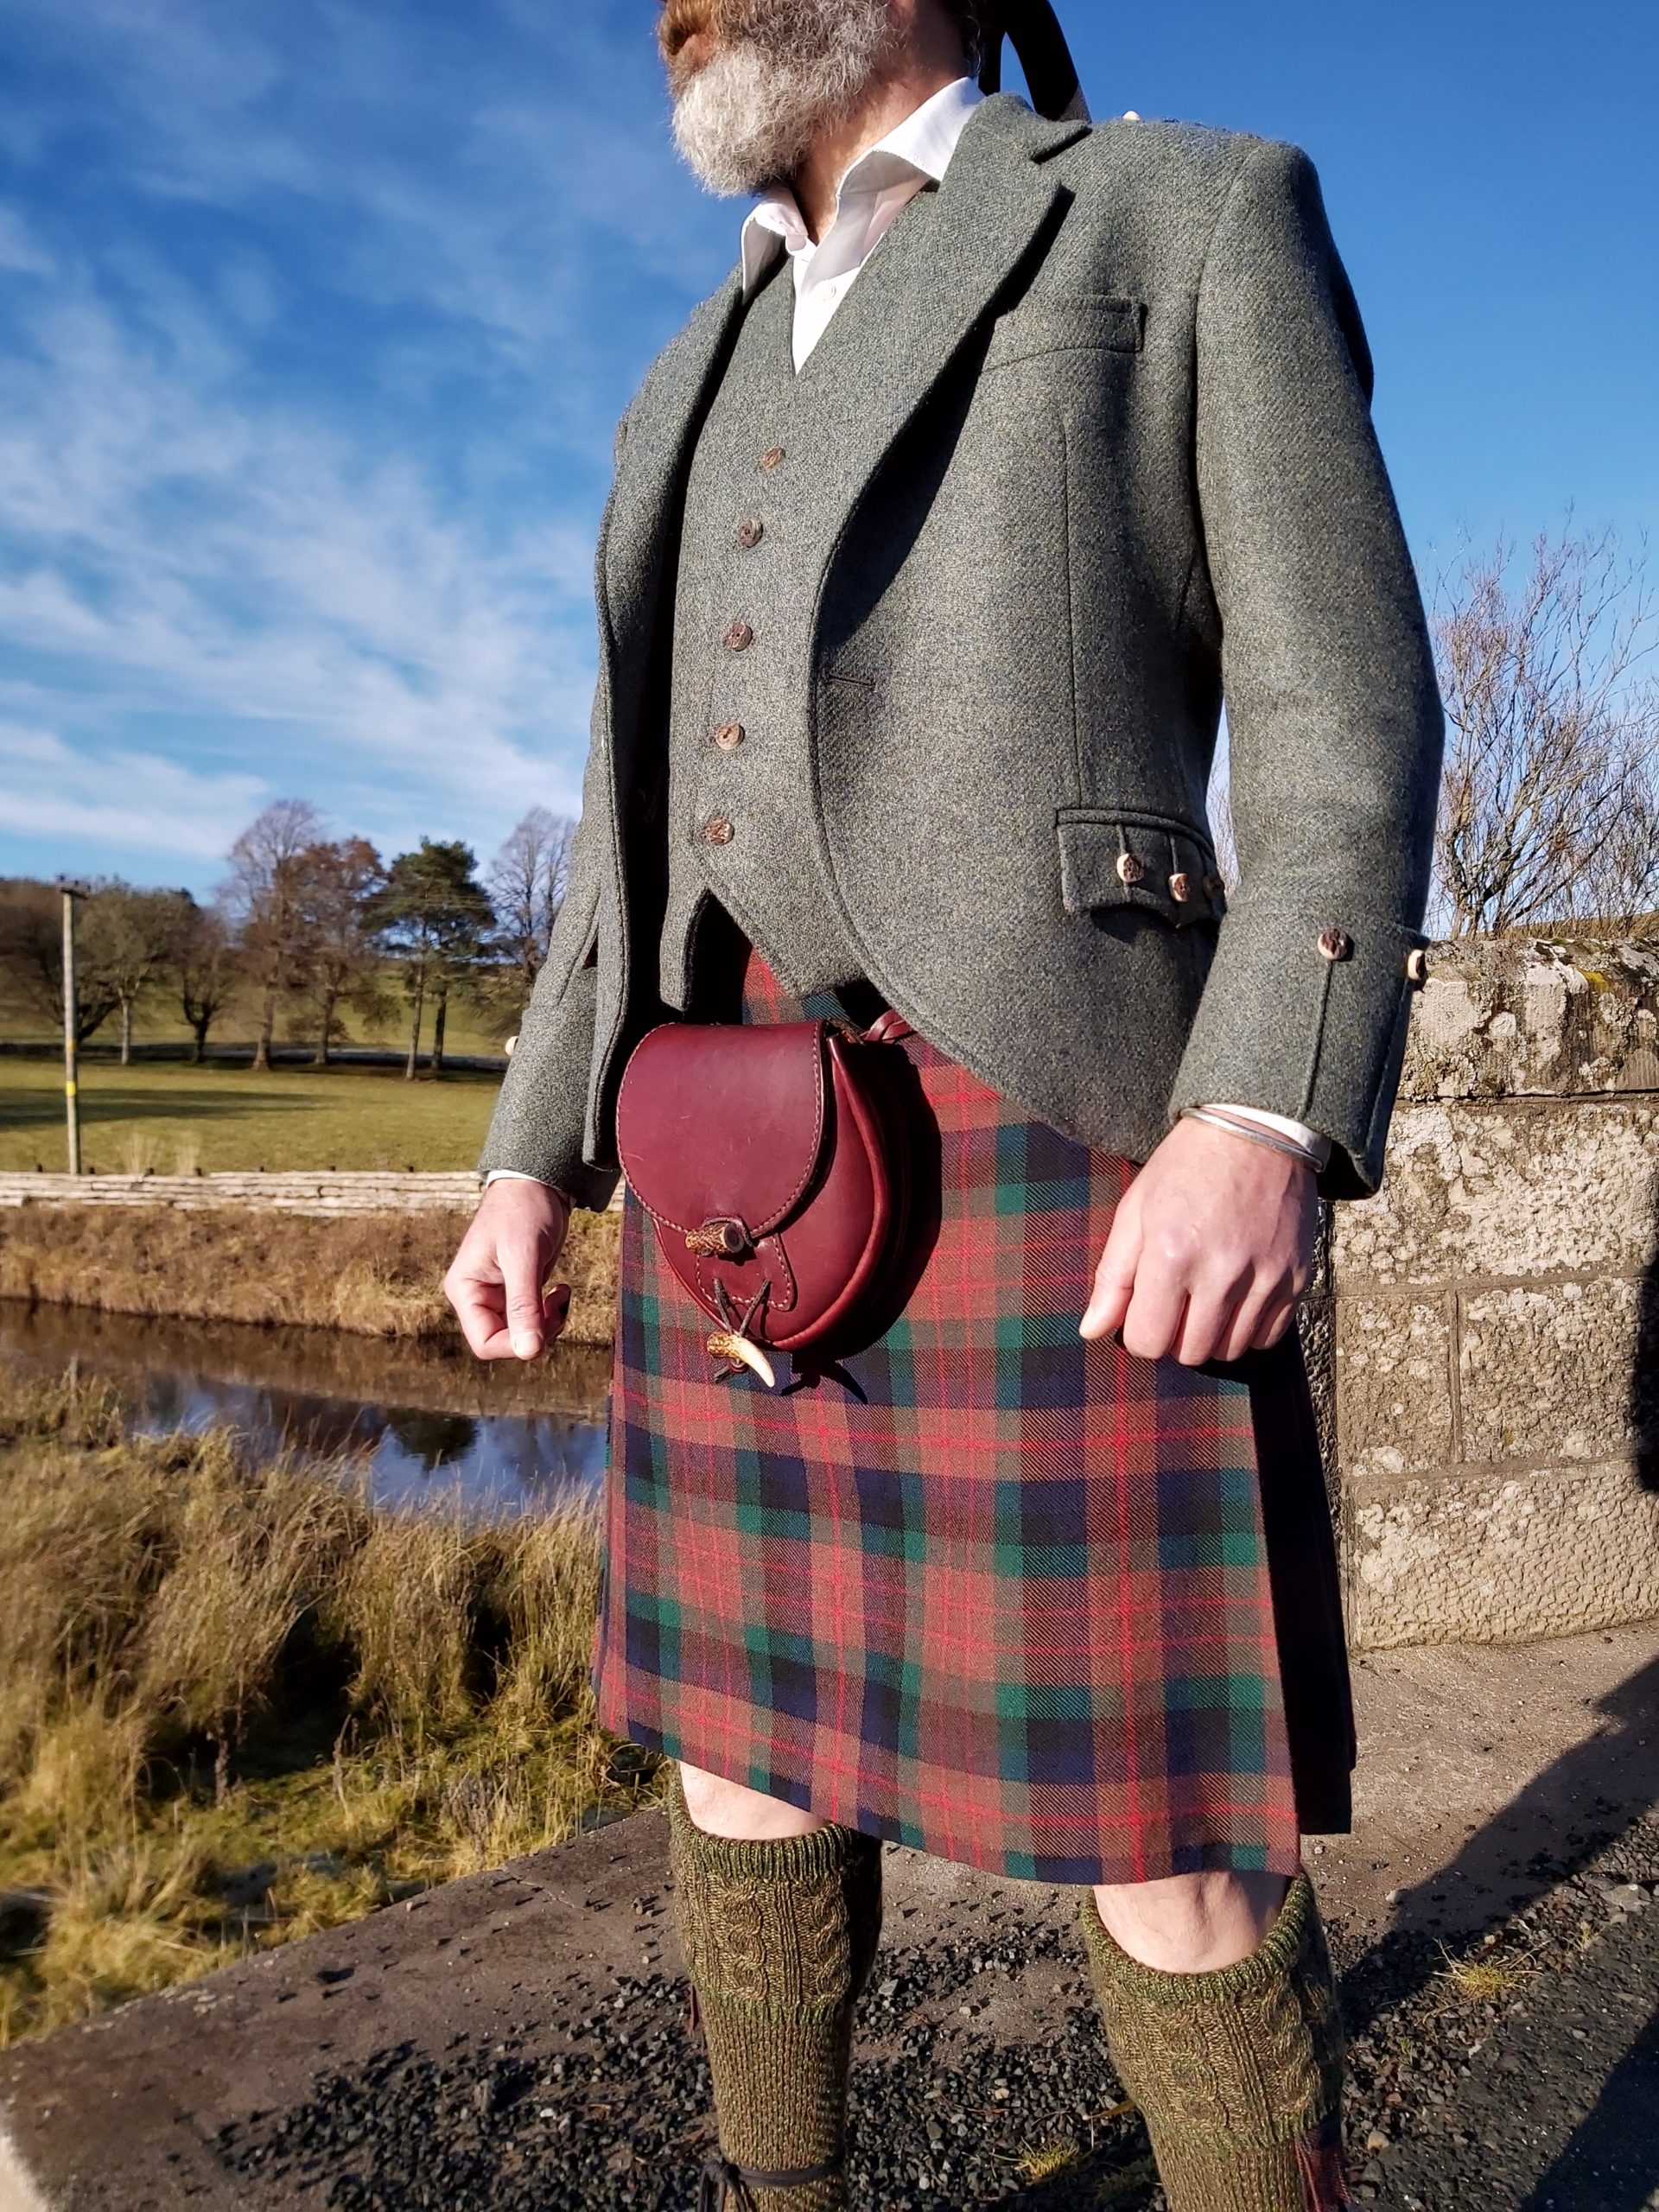 The Kilt Experience Handsewn Kilt, made-to-measure Elliots Estate Tweed outfit, Hand-stitched leather Antler sporran, House of Cheviot Socks, Made in Scotland, Scottish Borders